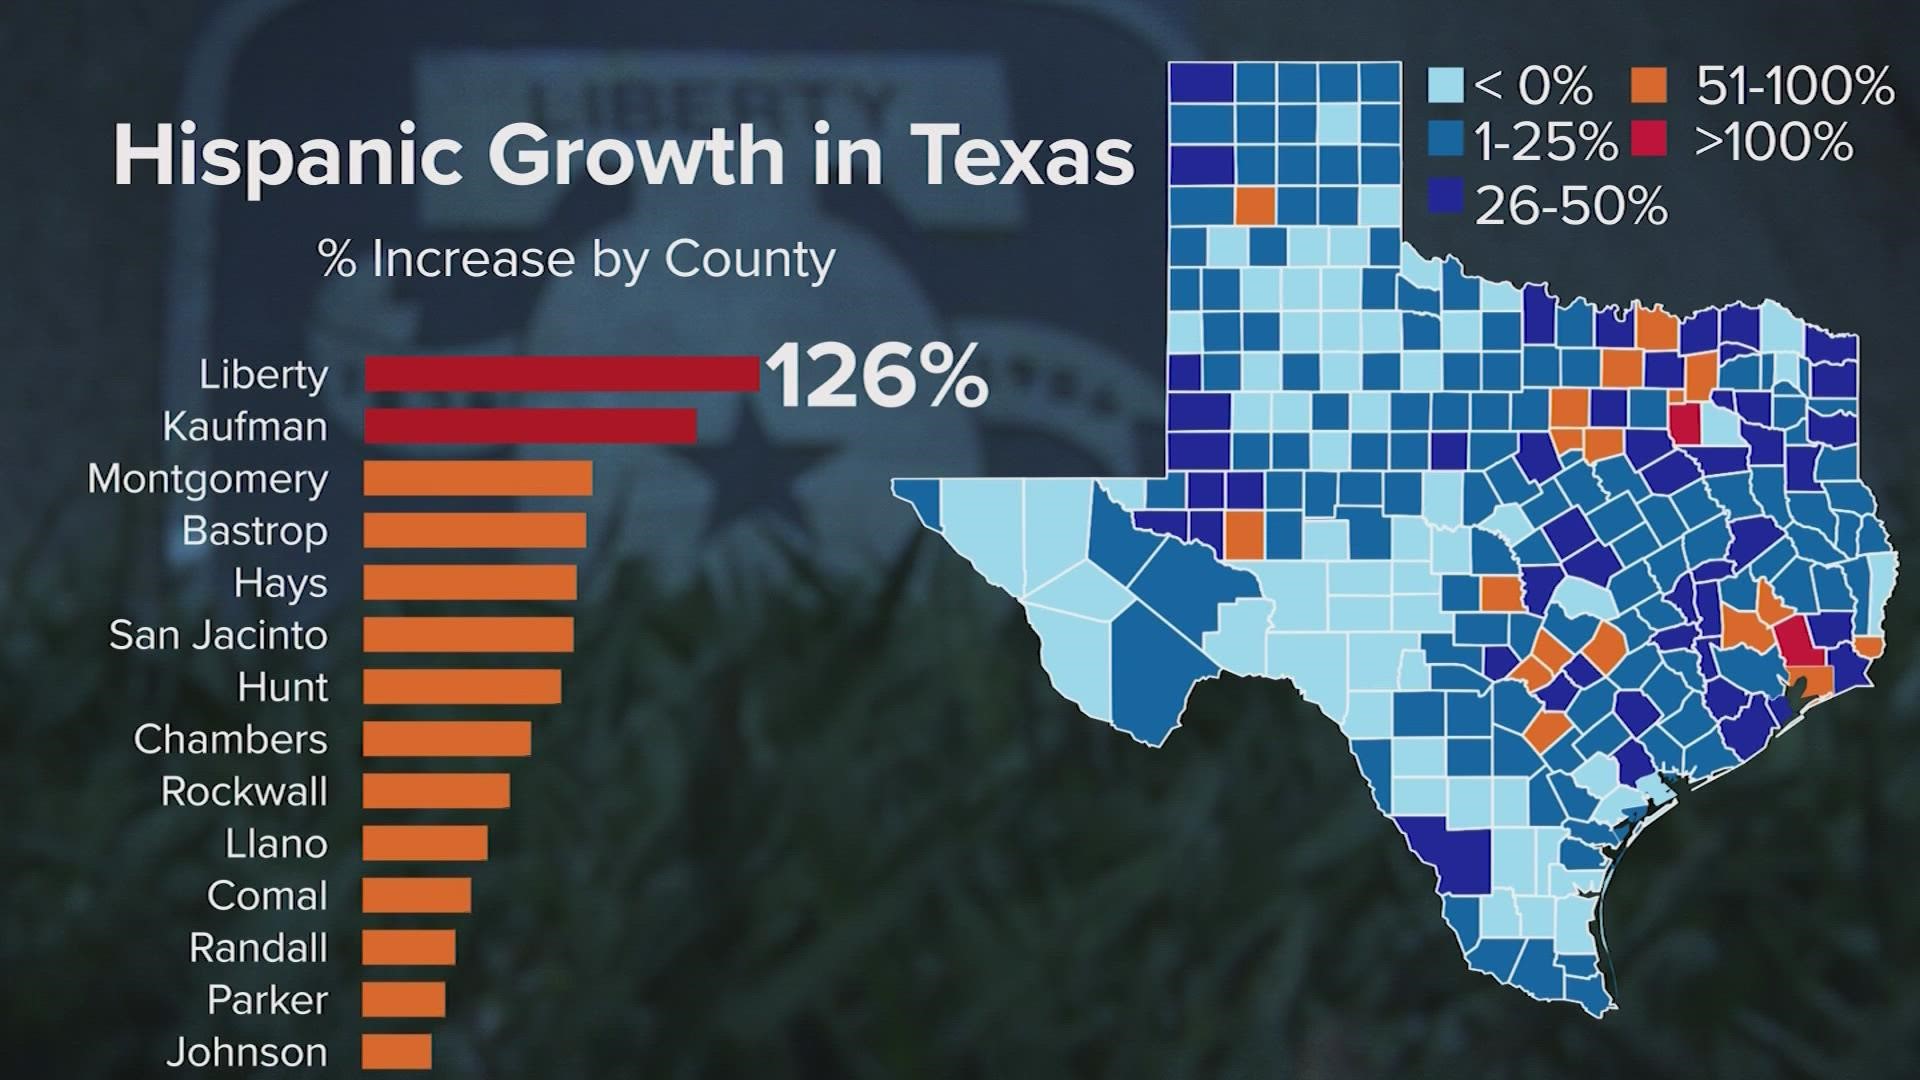 US Census Liberty County shows greatest growth of Hispanics in Texas